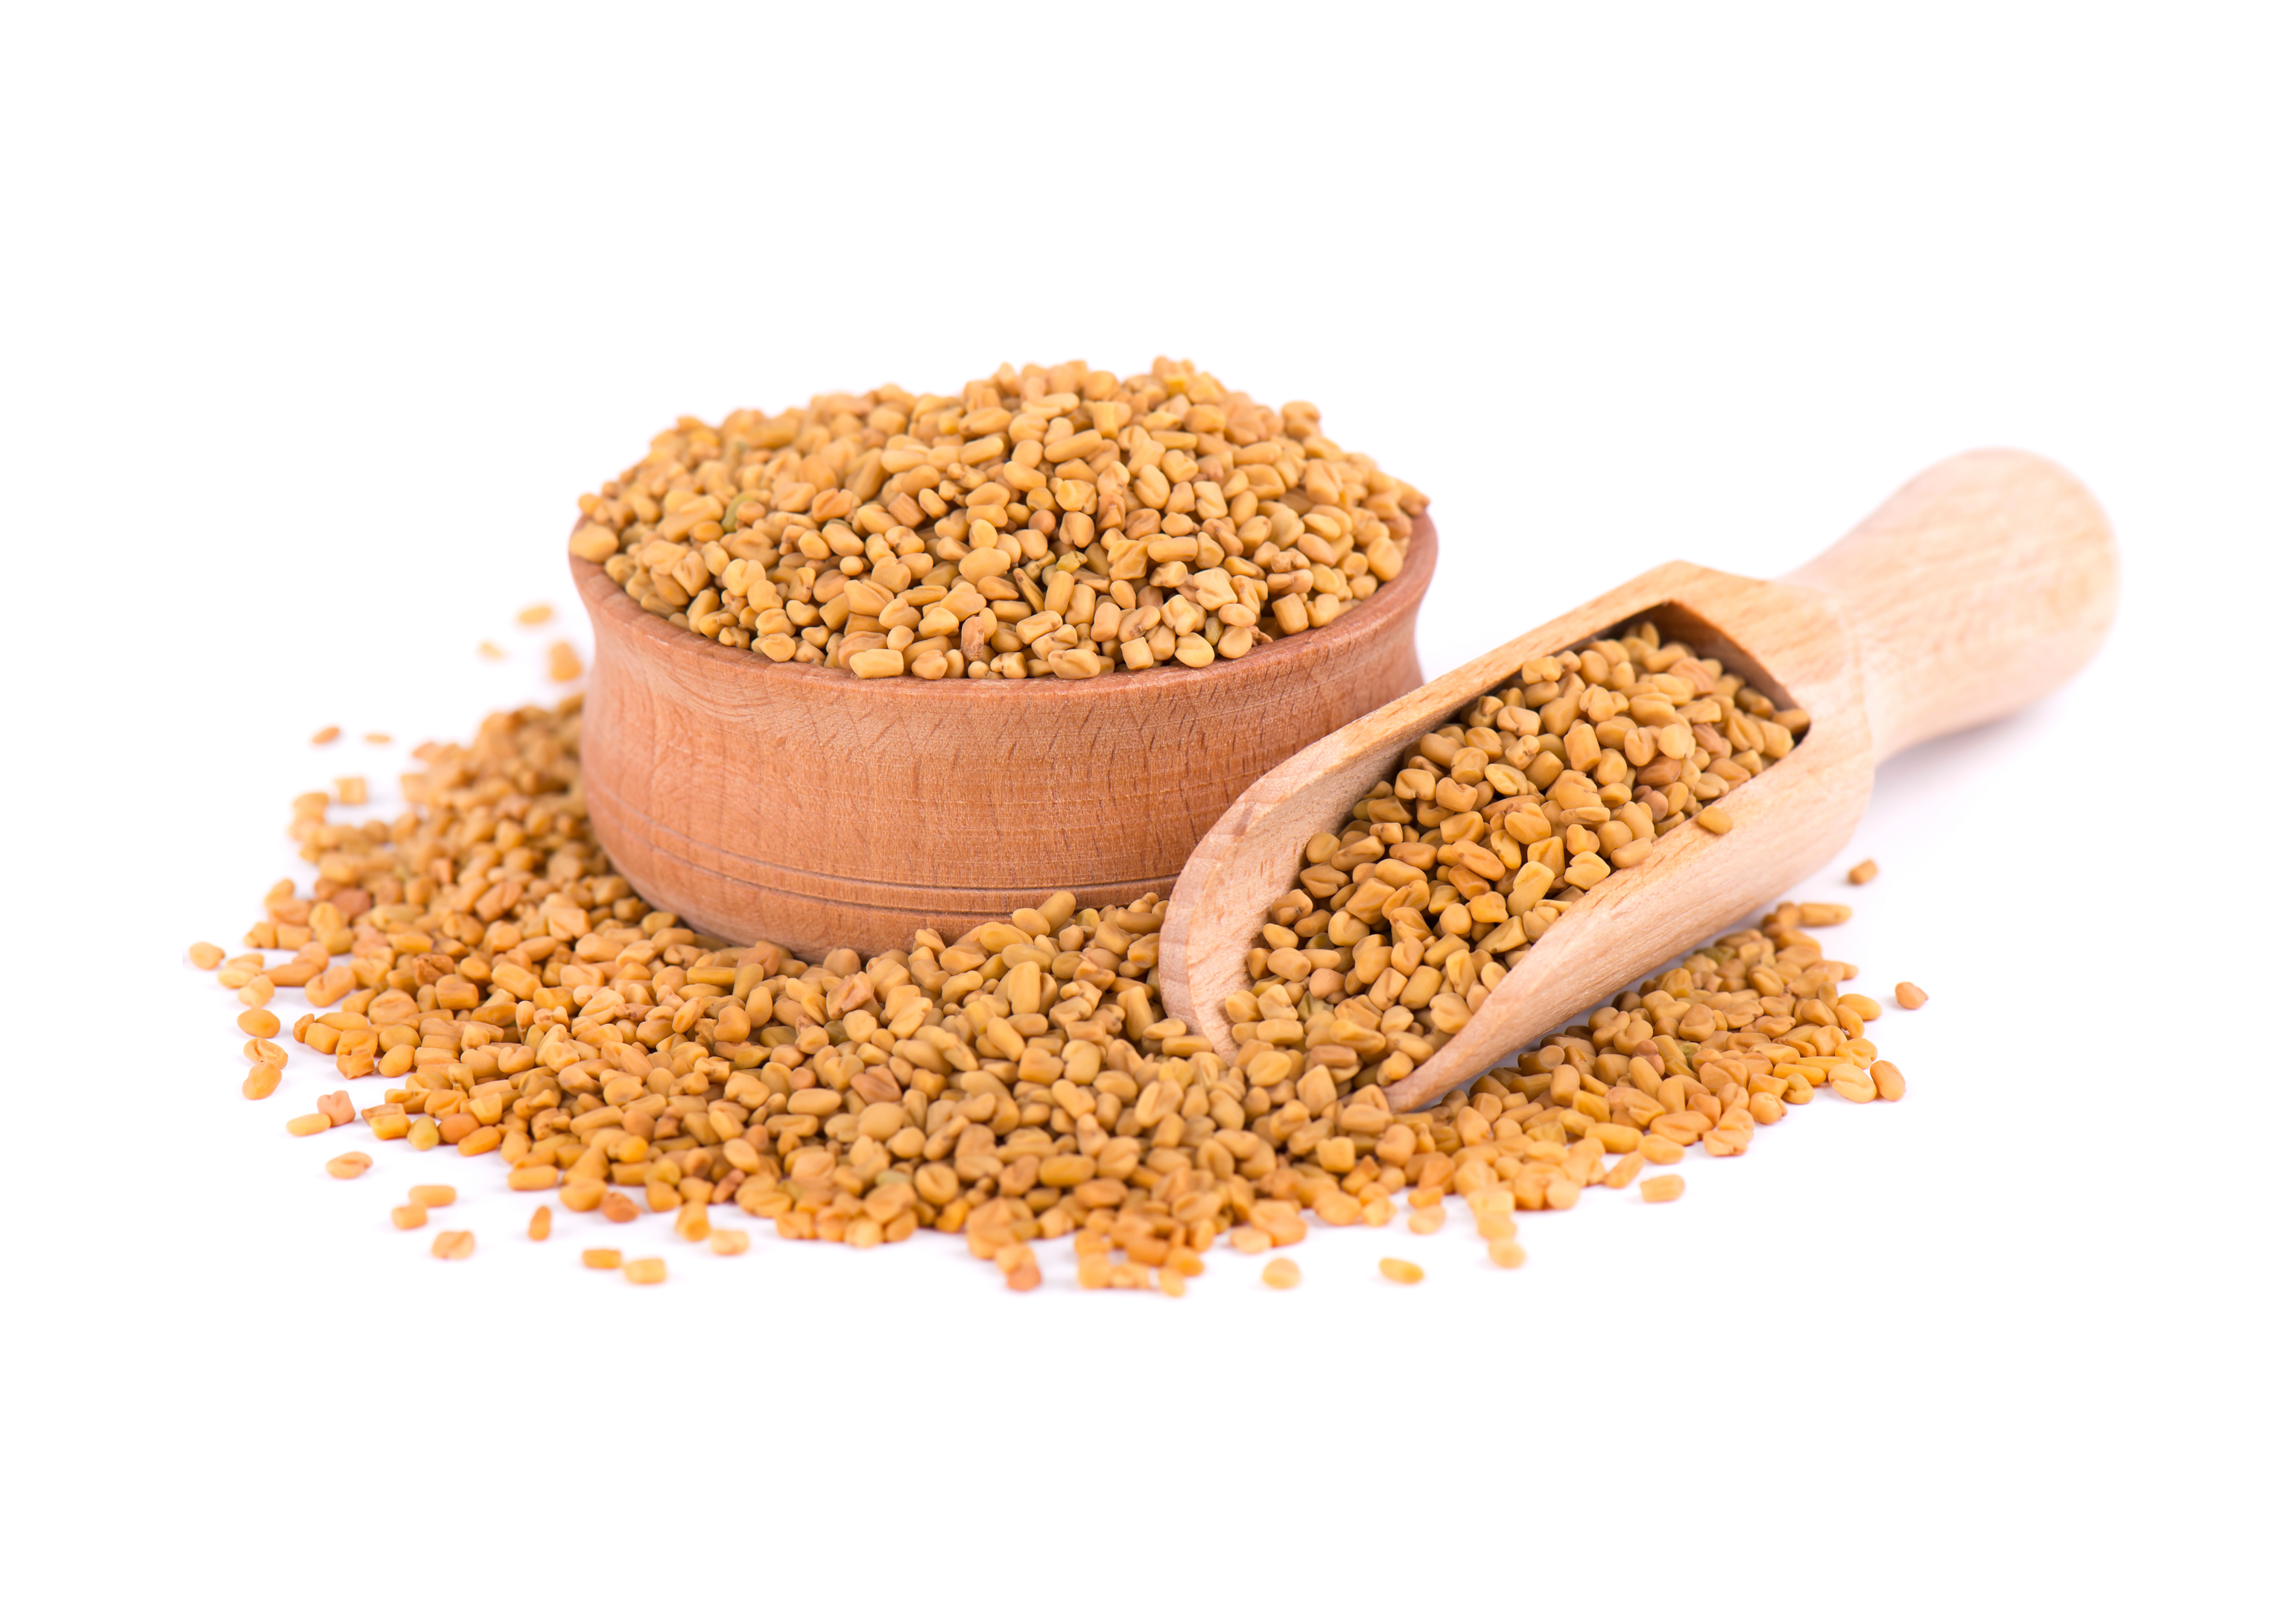 fenugreek supplementation in a diet can be used to adjust testosterone levels 